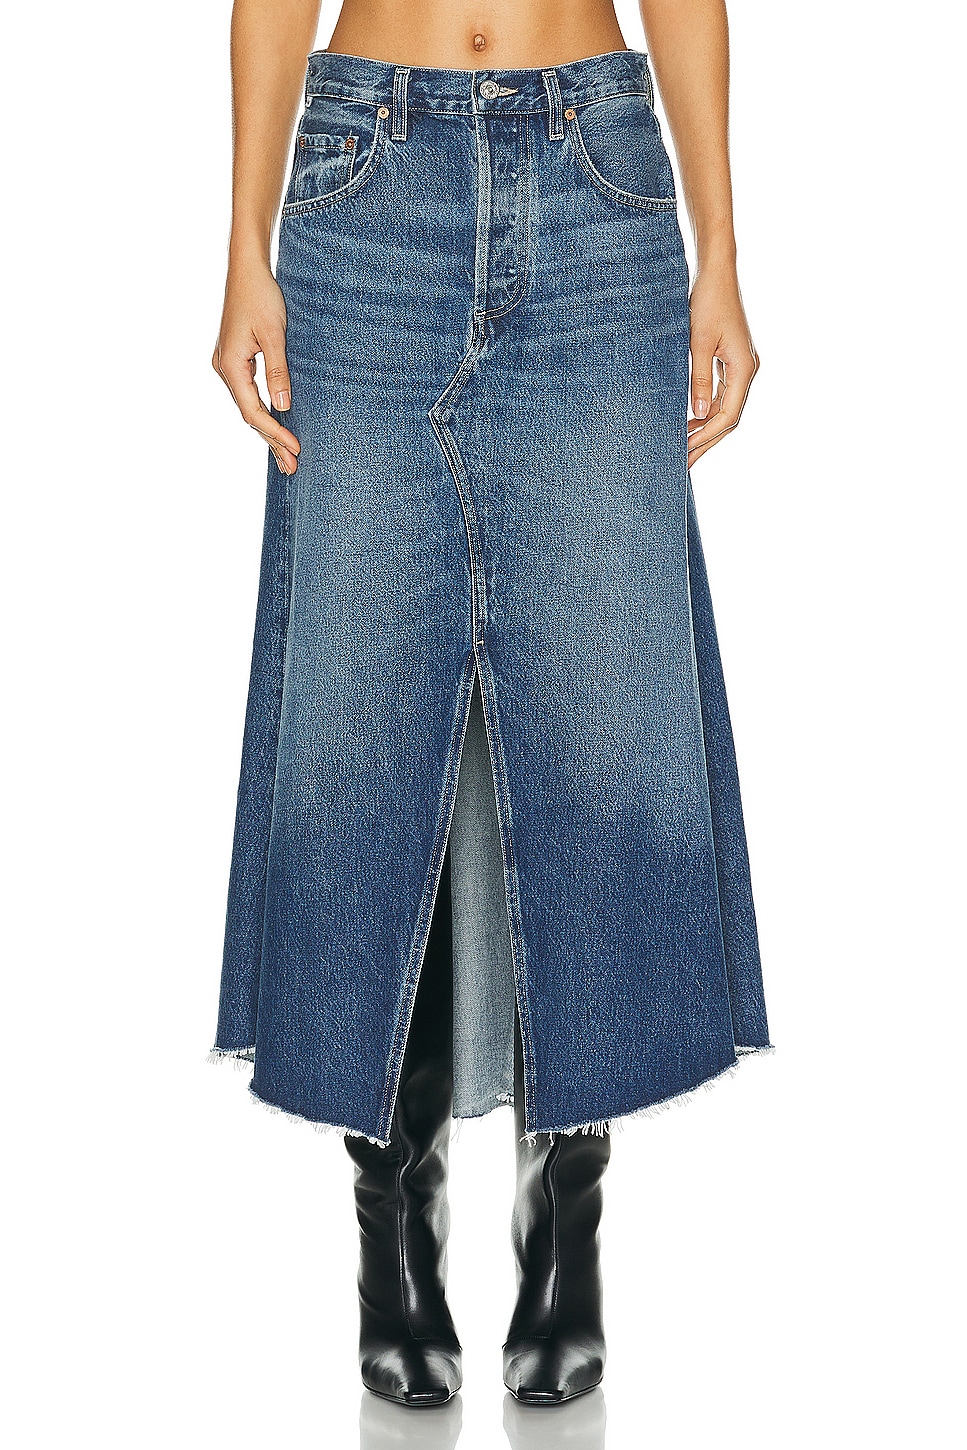 Image 1 of Citizens of Humanity Mina Reworked Skirt in Brielle